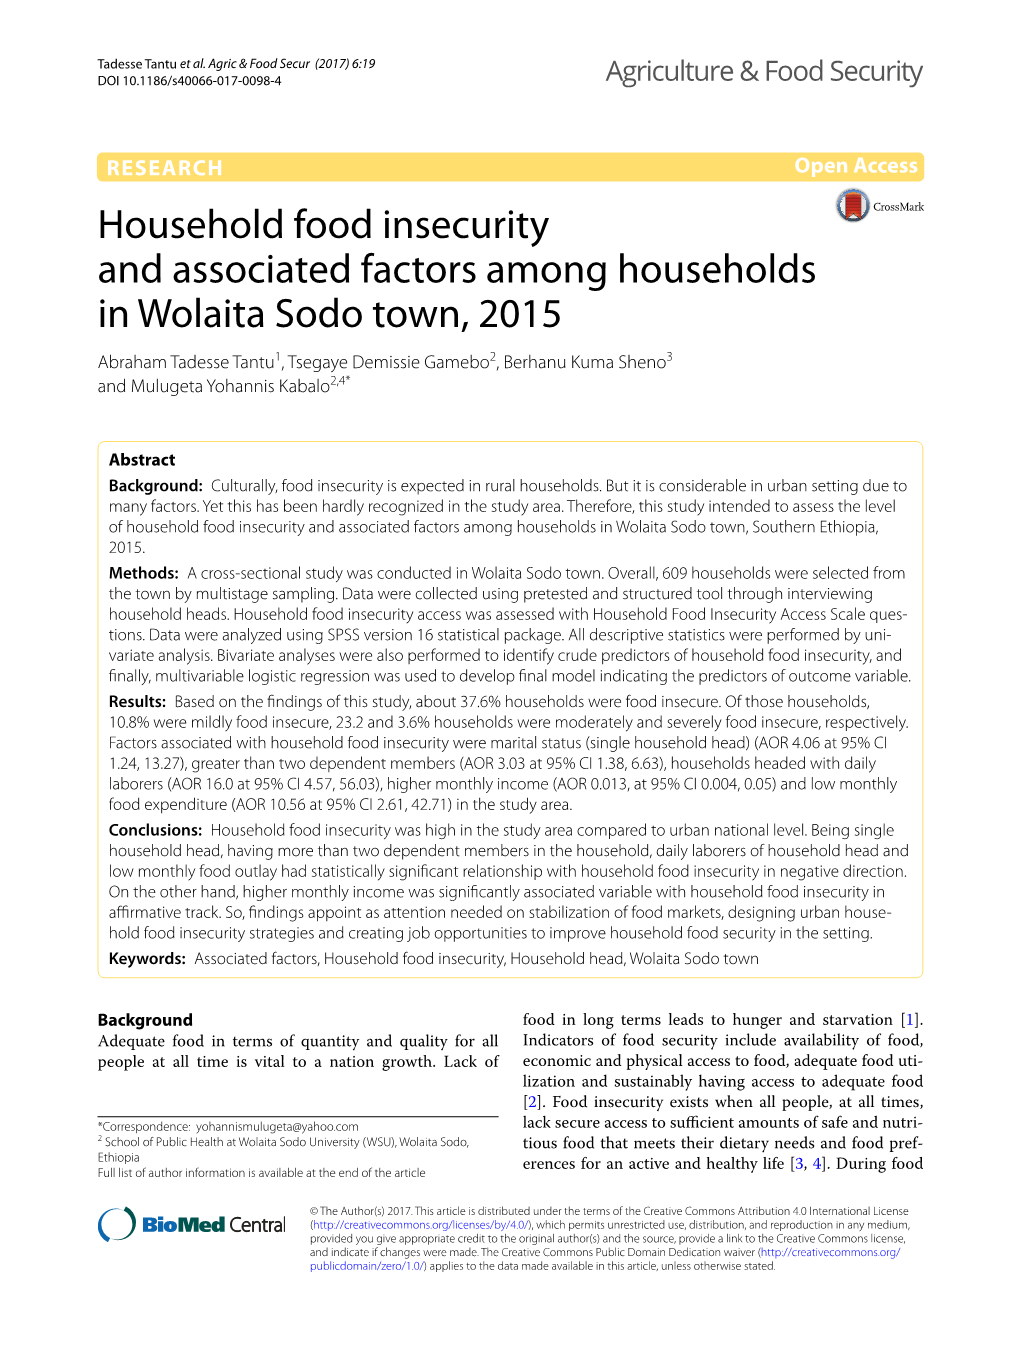 Household Food Insecurity and Associated Factors Among Households in Wolaita Sodo Town, 2015